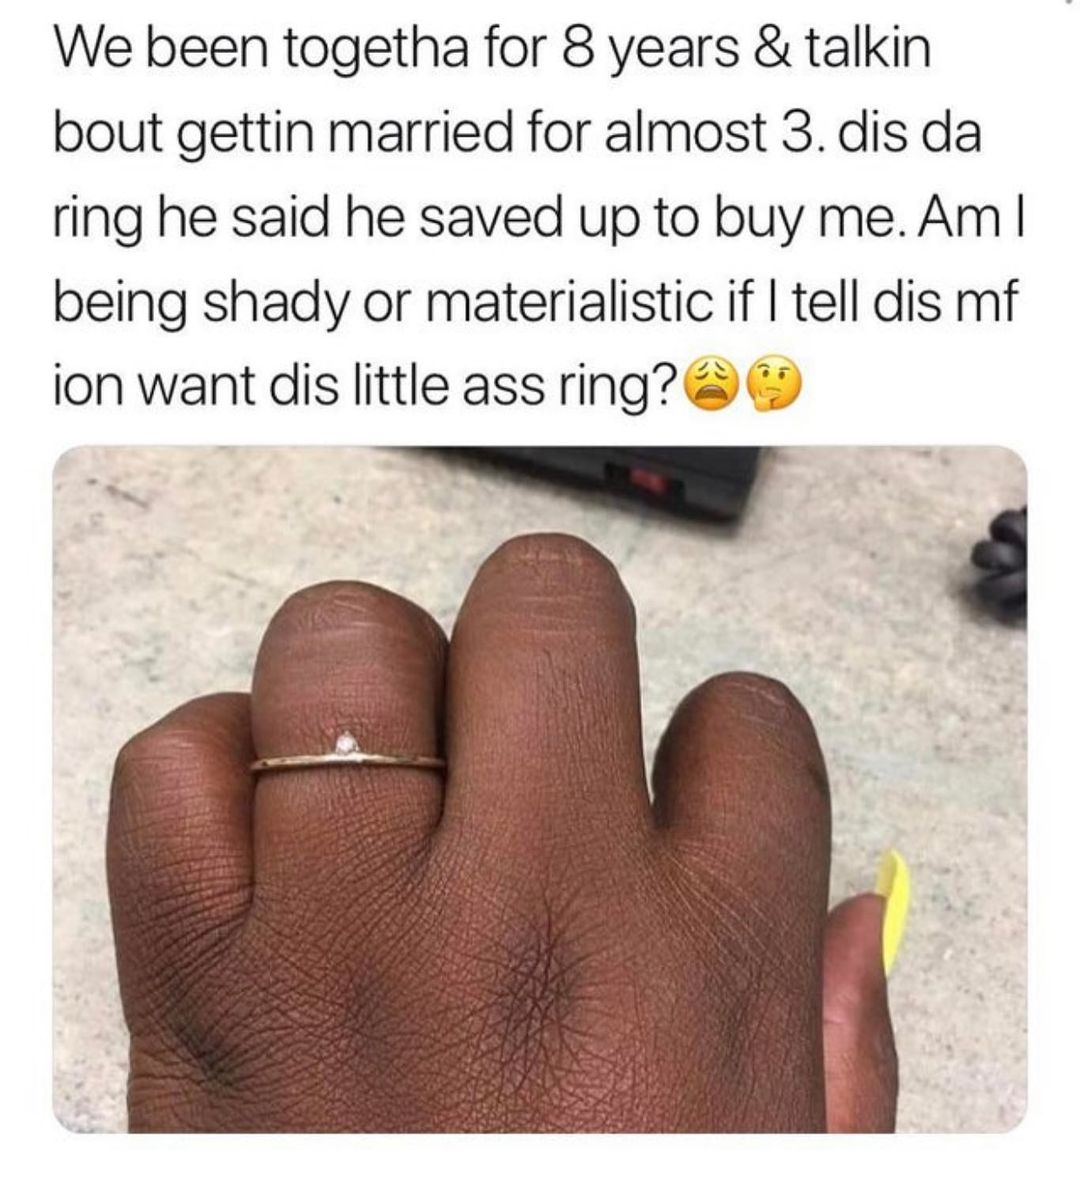 We been togetha for 8 years & talkin bout gettin married for almost 3. Dis da ring he said he saved up to buy me. Am I being shady or materialistic if I tell dis mf ion want dis little ass ring?